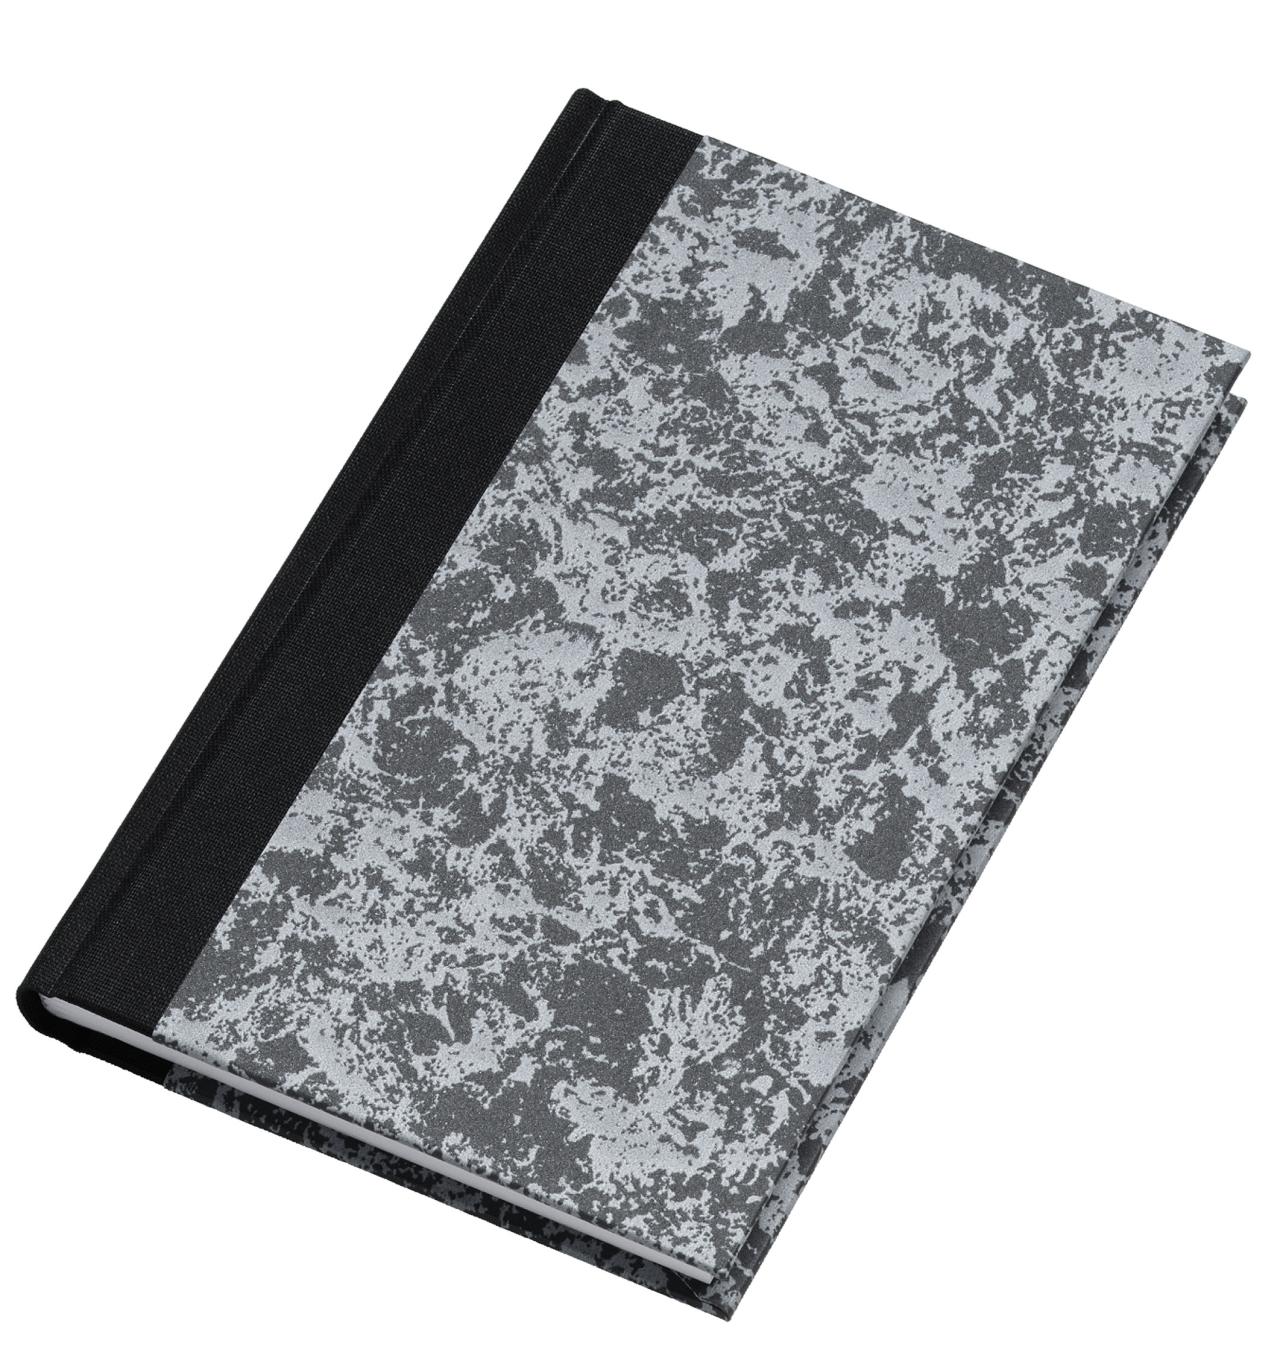 Atlanta Excellent Notebook, sewn 210 x 165 mm, 144 pages